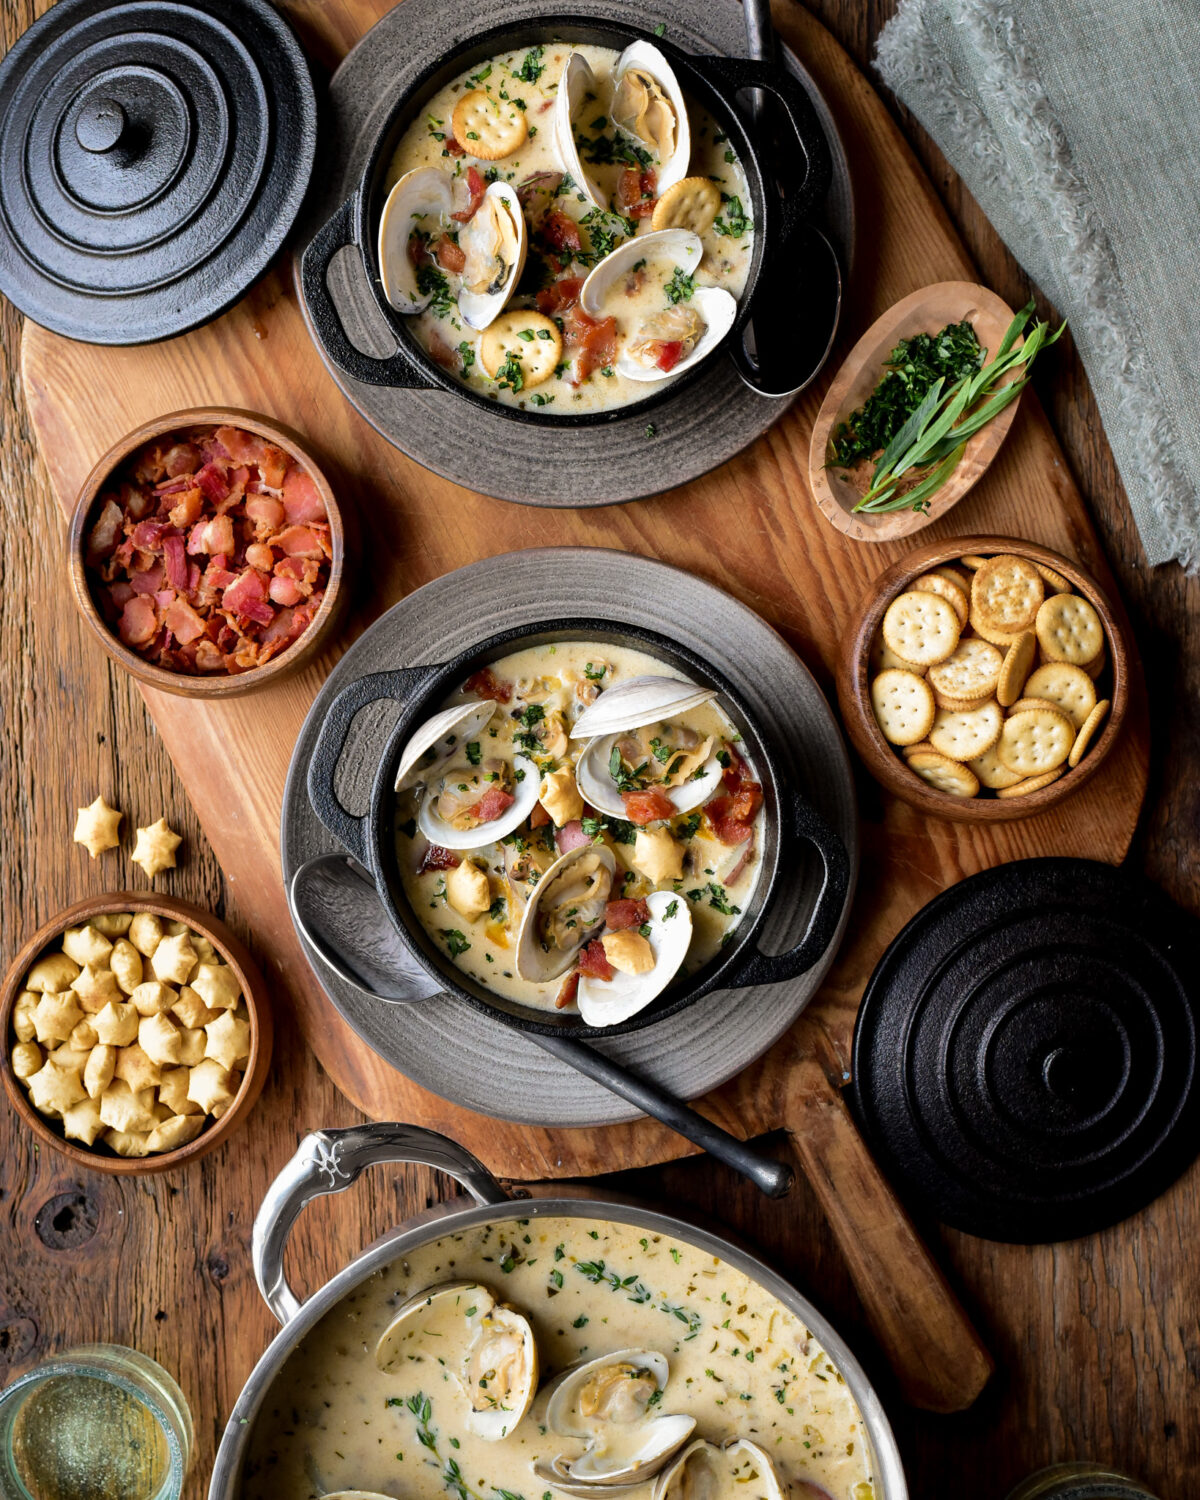 Fill individual serving bowls of clam chowder and top with chopped tarragon, diced bacon, steamed clams and crackers.